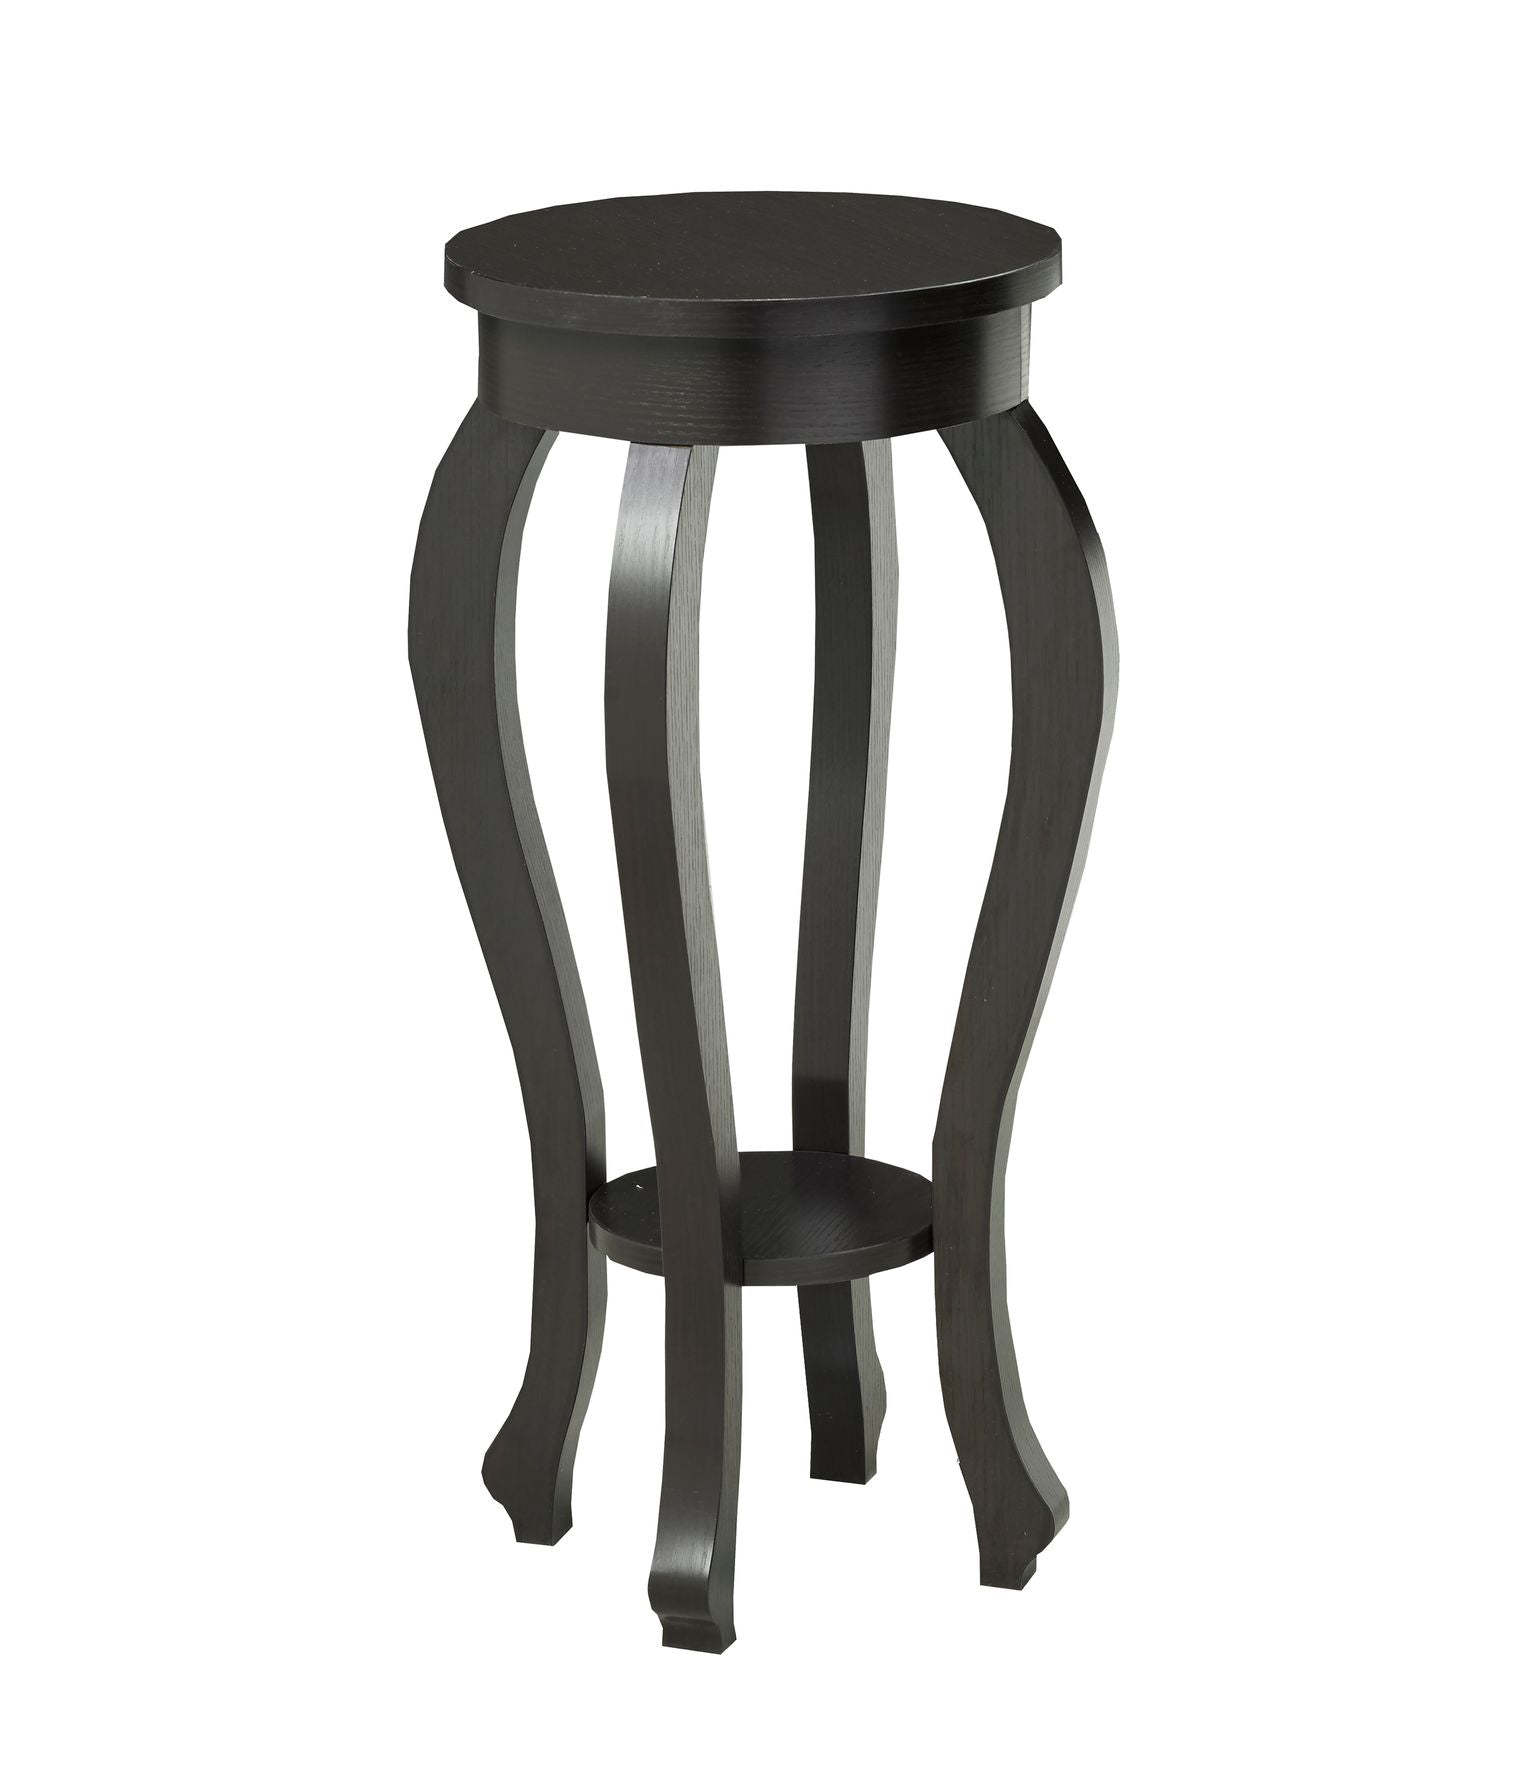 Small Plant Stand - 18046